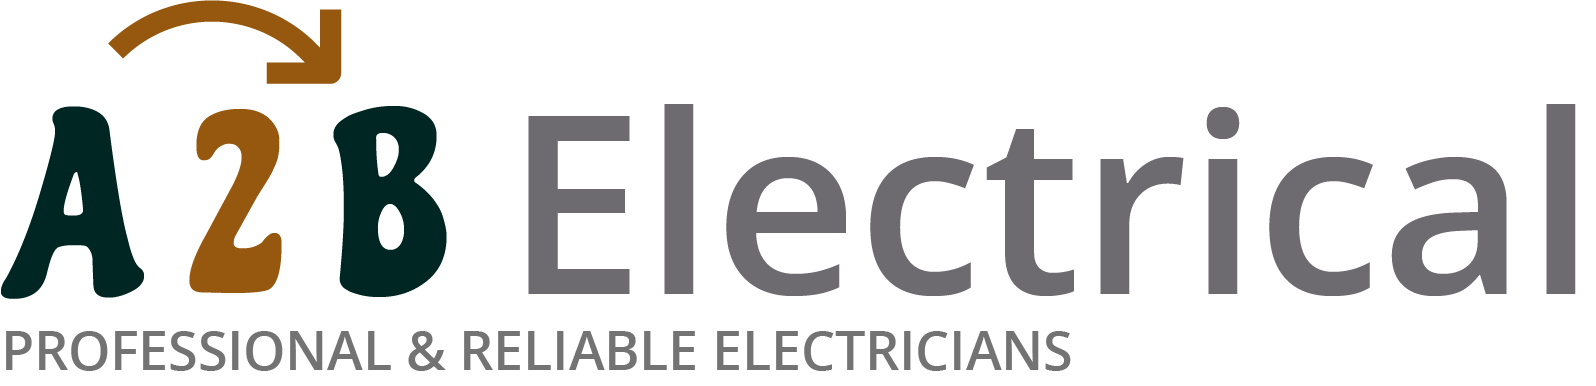 If you have electrical wiring problems in Shepton Mallet, we can provide an electrician to have a look for you. 